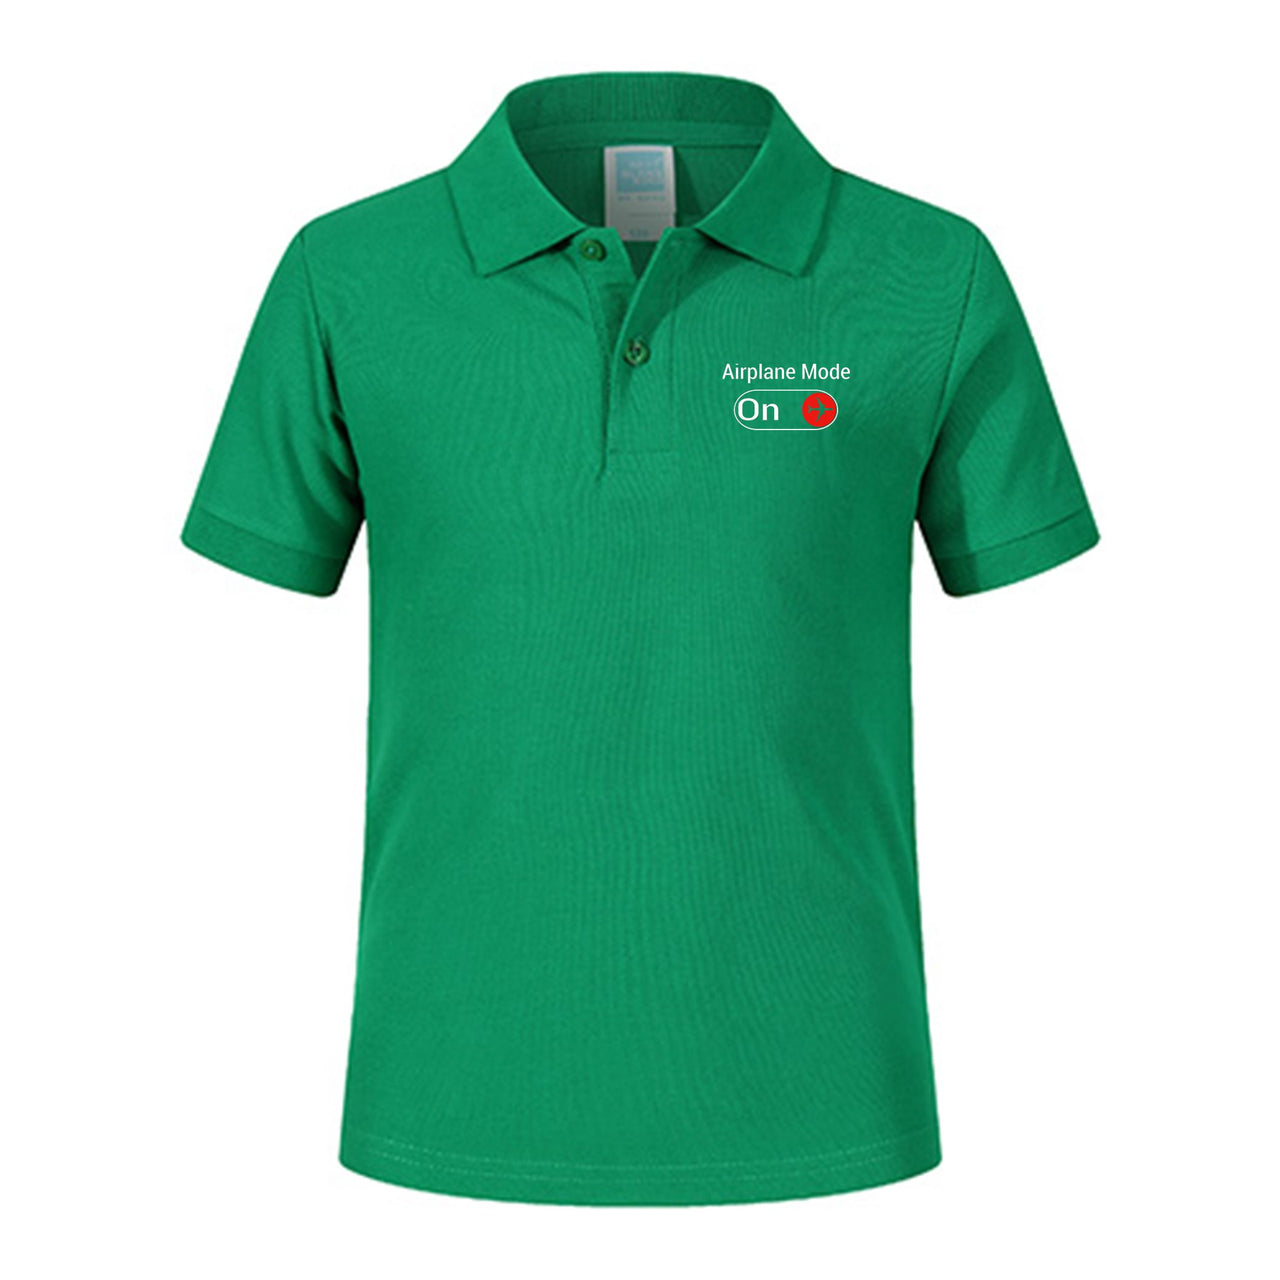 Airplane Mode On Designed Children Polo T-Shirts